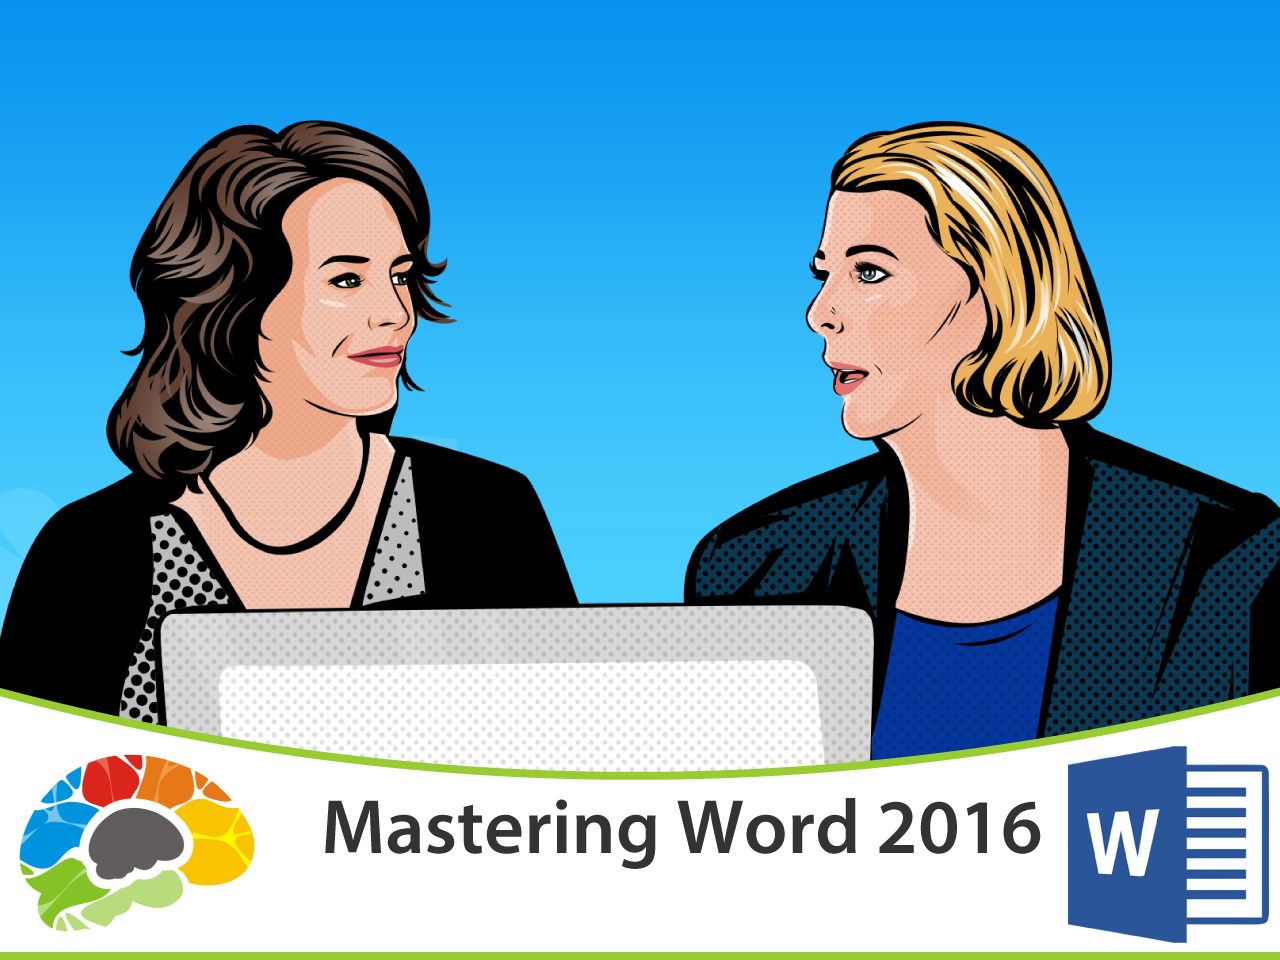 Mastering Word 2016 (full course)